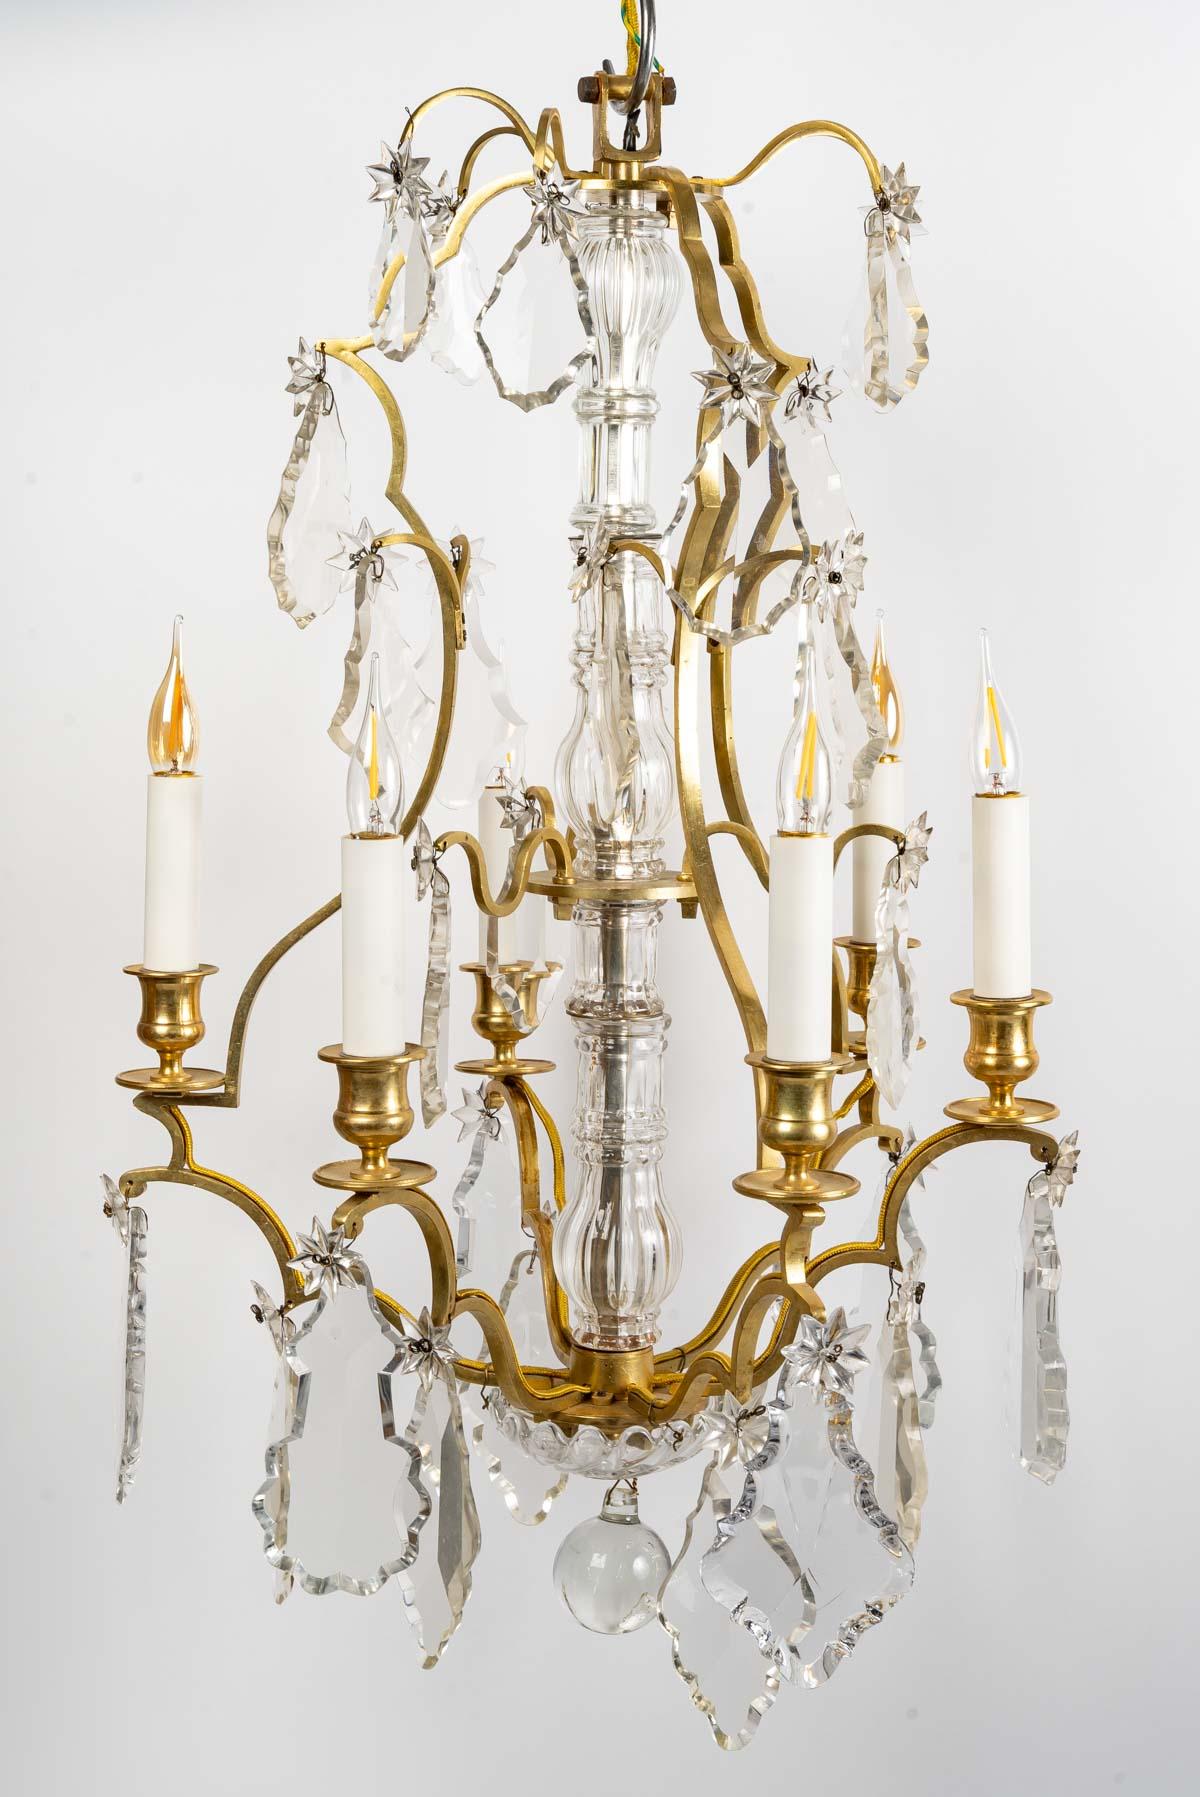 Louis XV style chandelier, early 20th century.
A Louis XV style gilt bronze and crystal chandelier, six lights, early 20th century.
Measures: H: 67 cm, D: 43 cm.